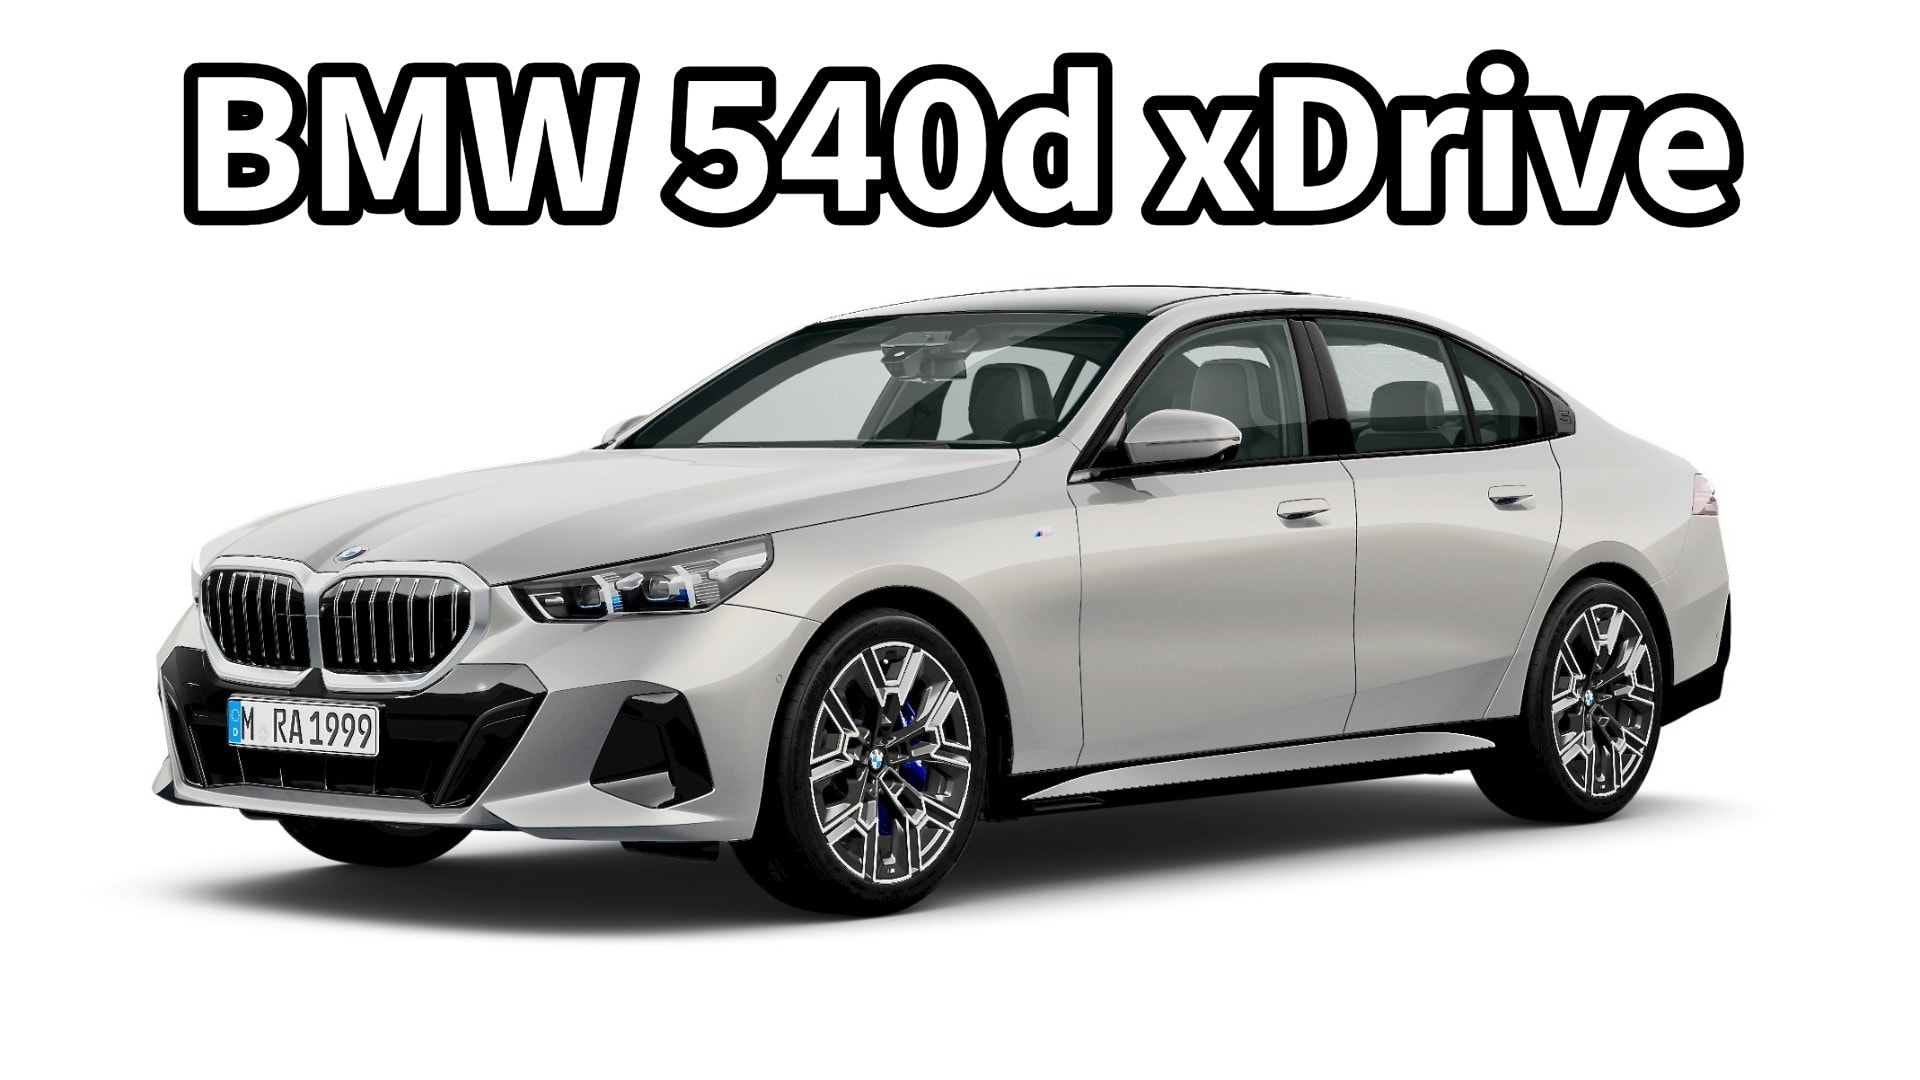 2025 BMW 5 Series launched with diesel engine, is faster than the E34 M5